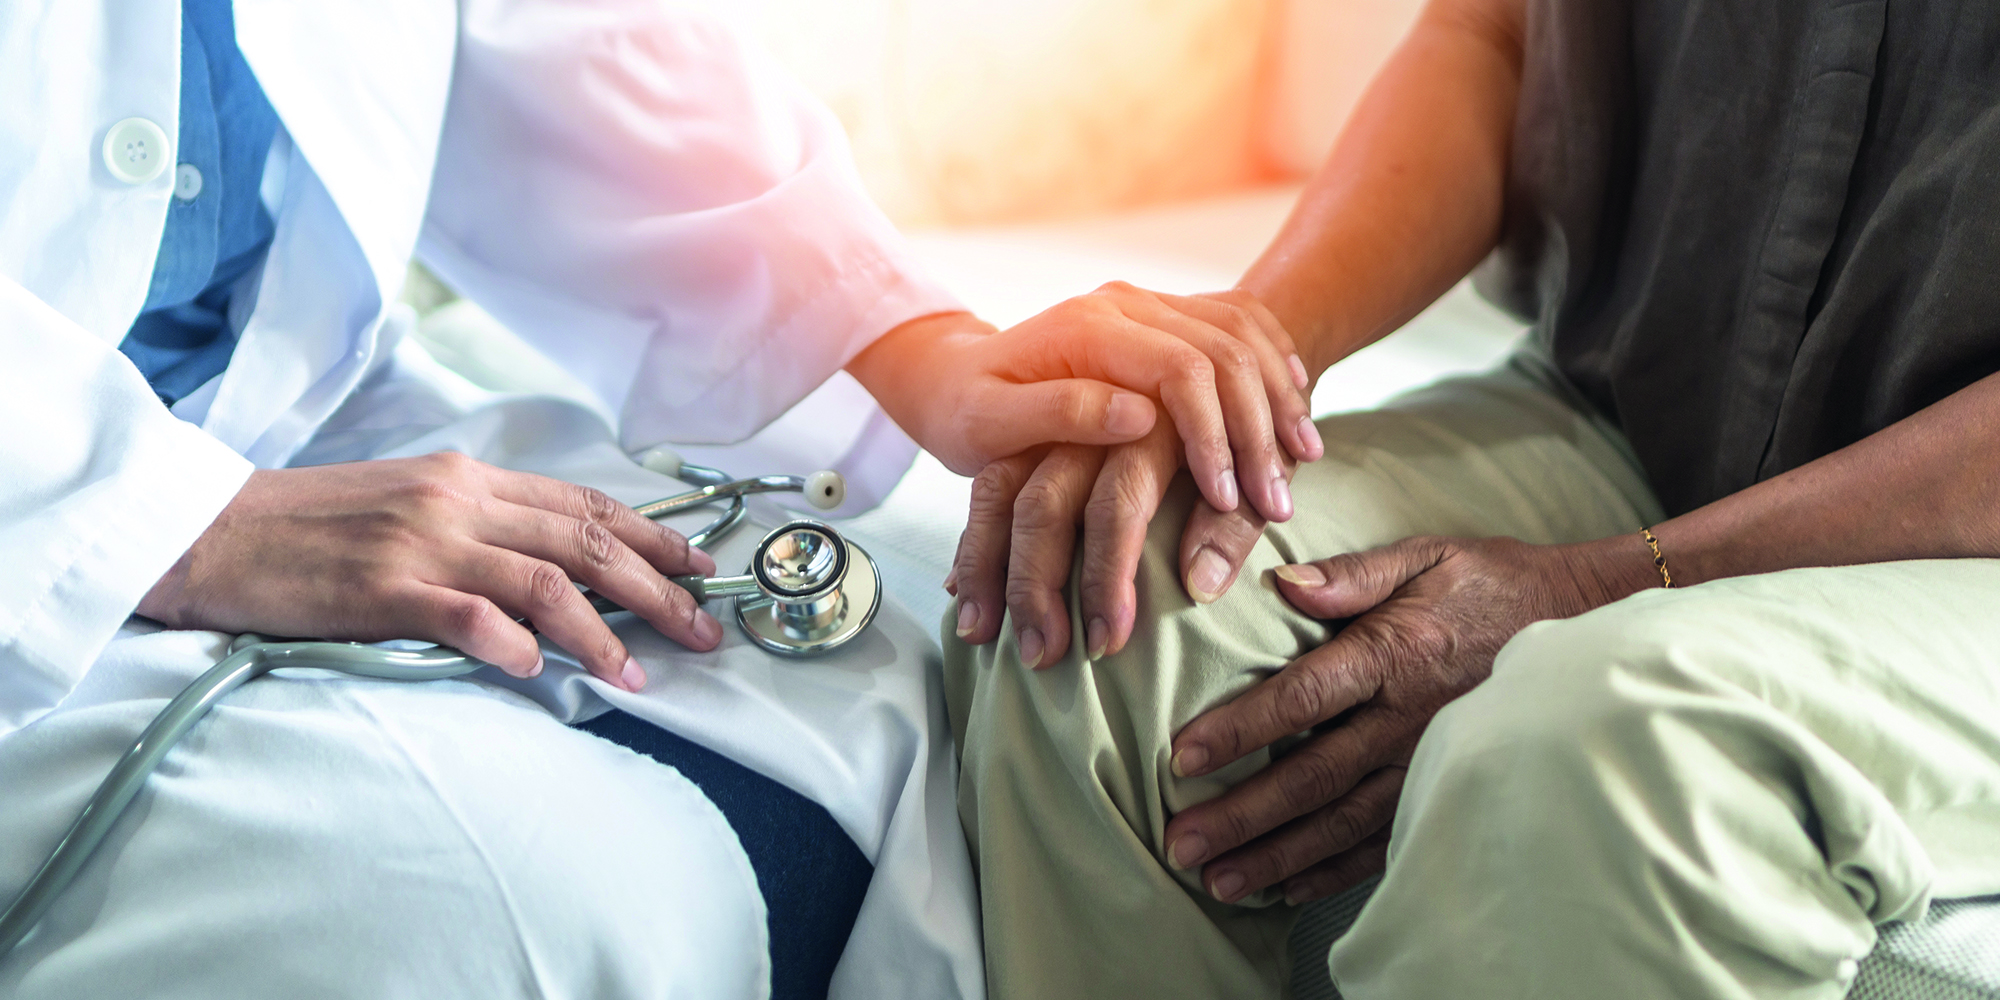 Parkinson's disease patient, Arthritis hand and knee pain or mental health care concept with geriatric doctor consulting examining elderly senior aged adult in medical exam clinic or hospital